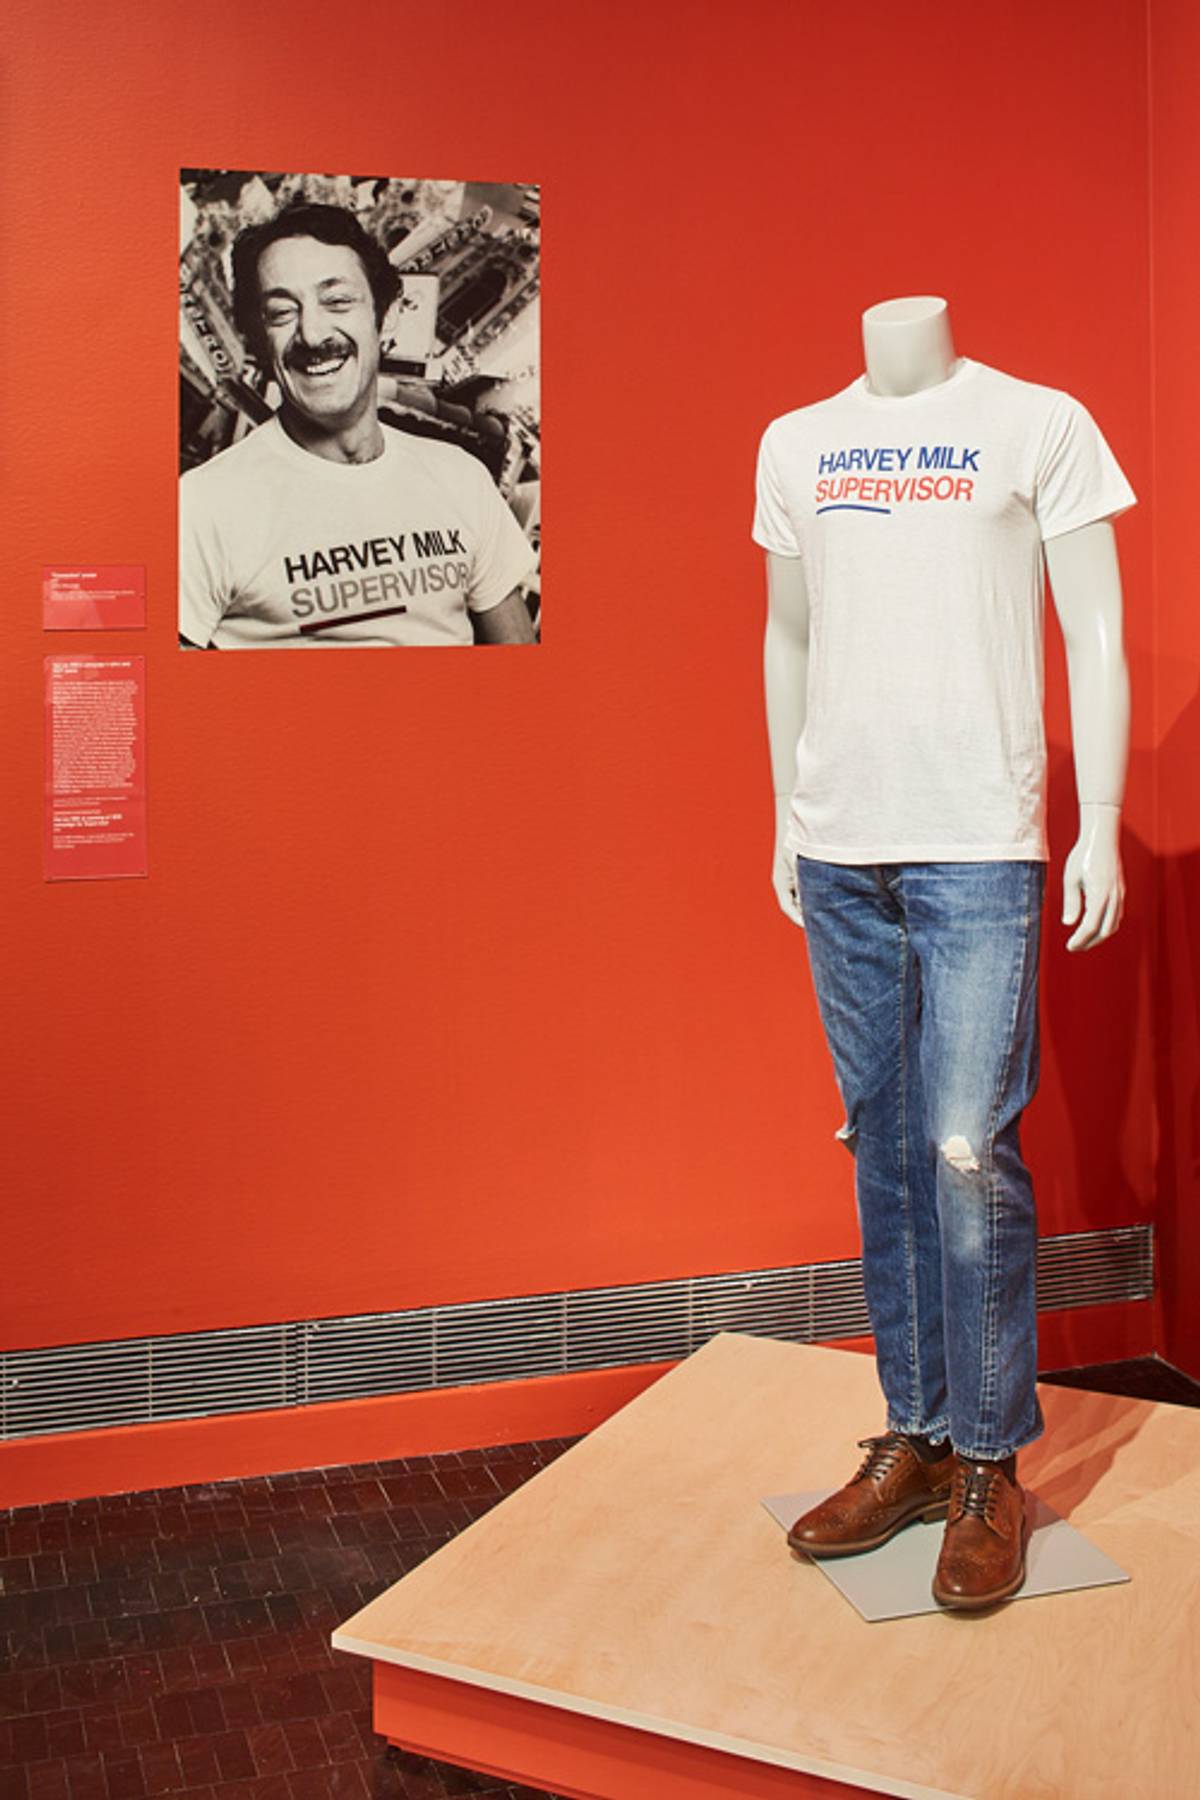 Harvey Milk’s campaign T-shirt and 501 ® jeans, 1970s (Levi Strauss & Co. Archives; photo: JKA Photography)